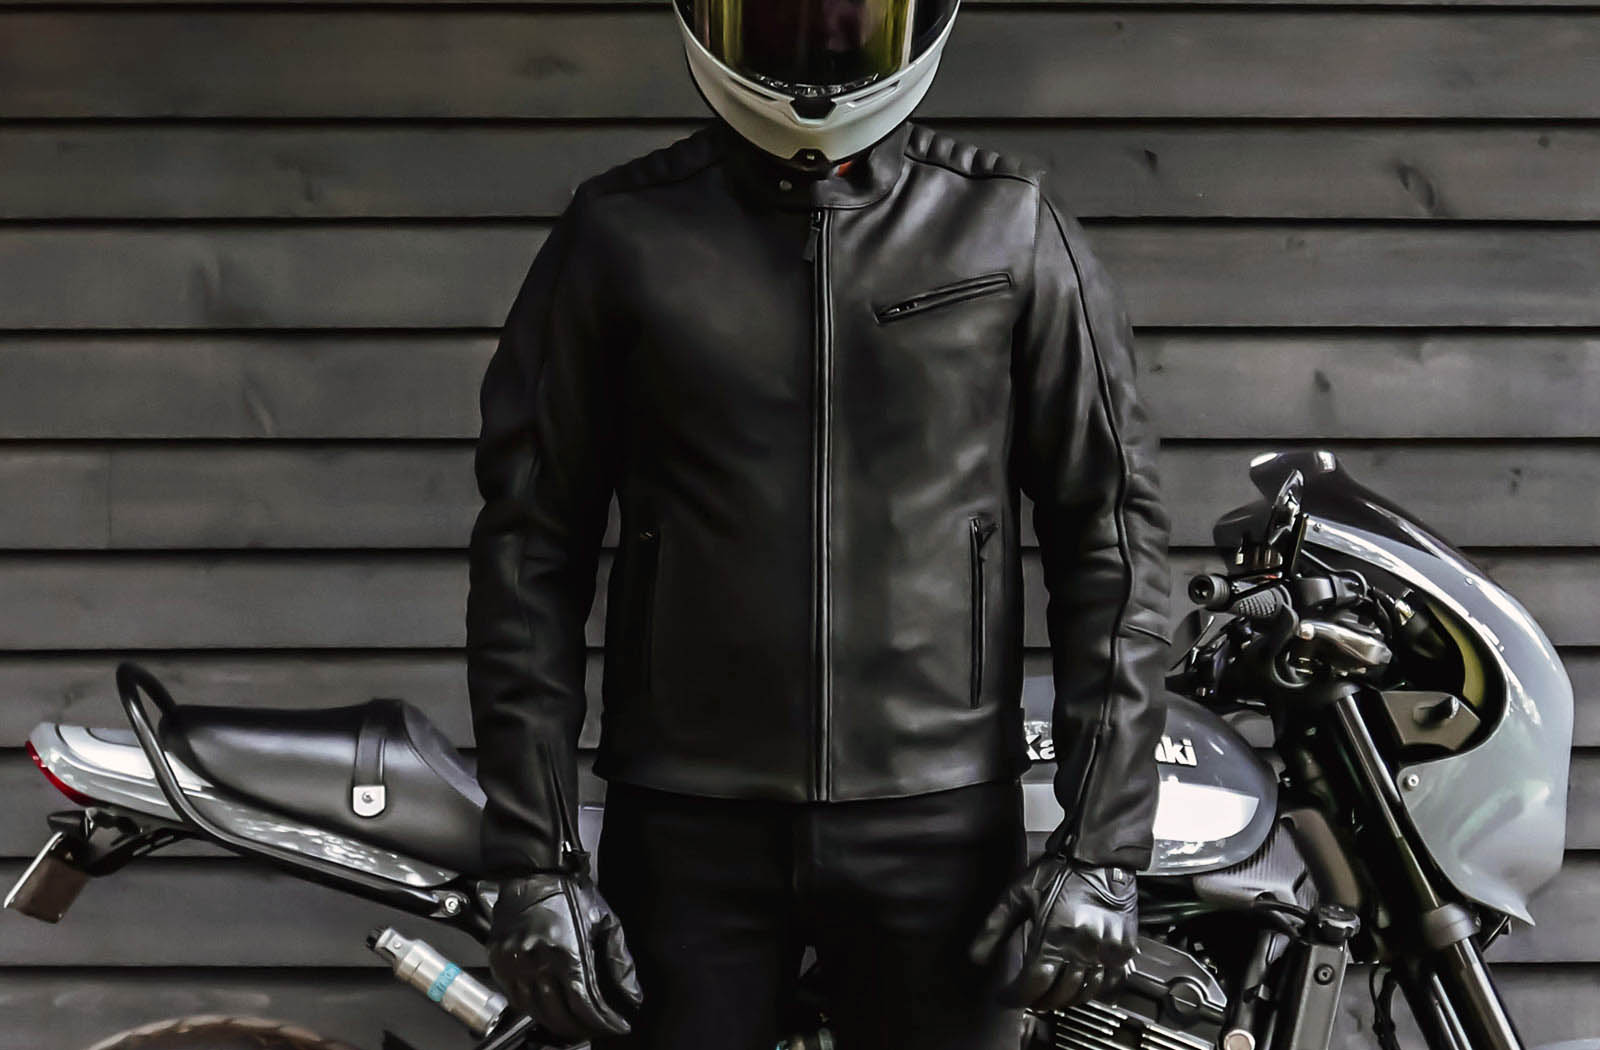 Riding Gear Review - Pando Moto Tatami LT 01 Leather Jacket